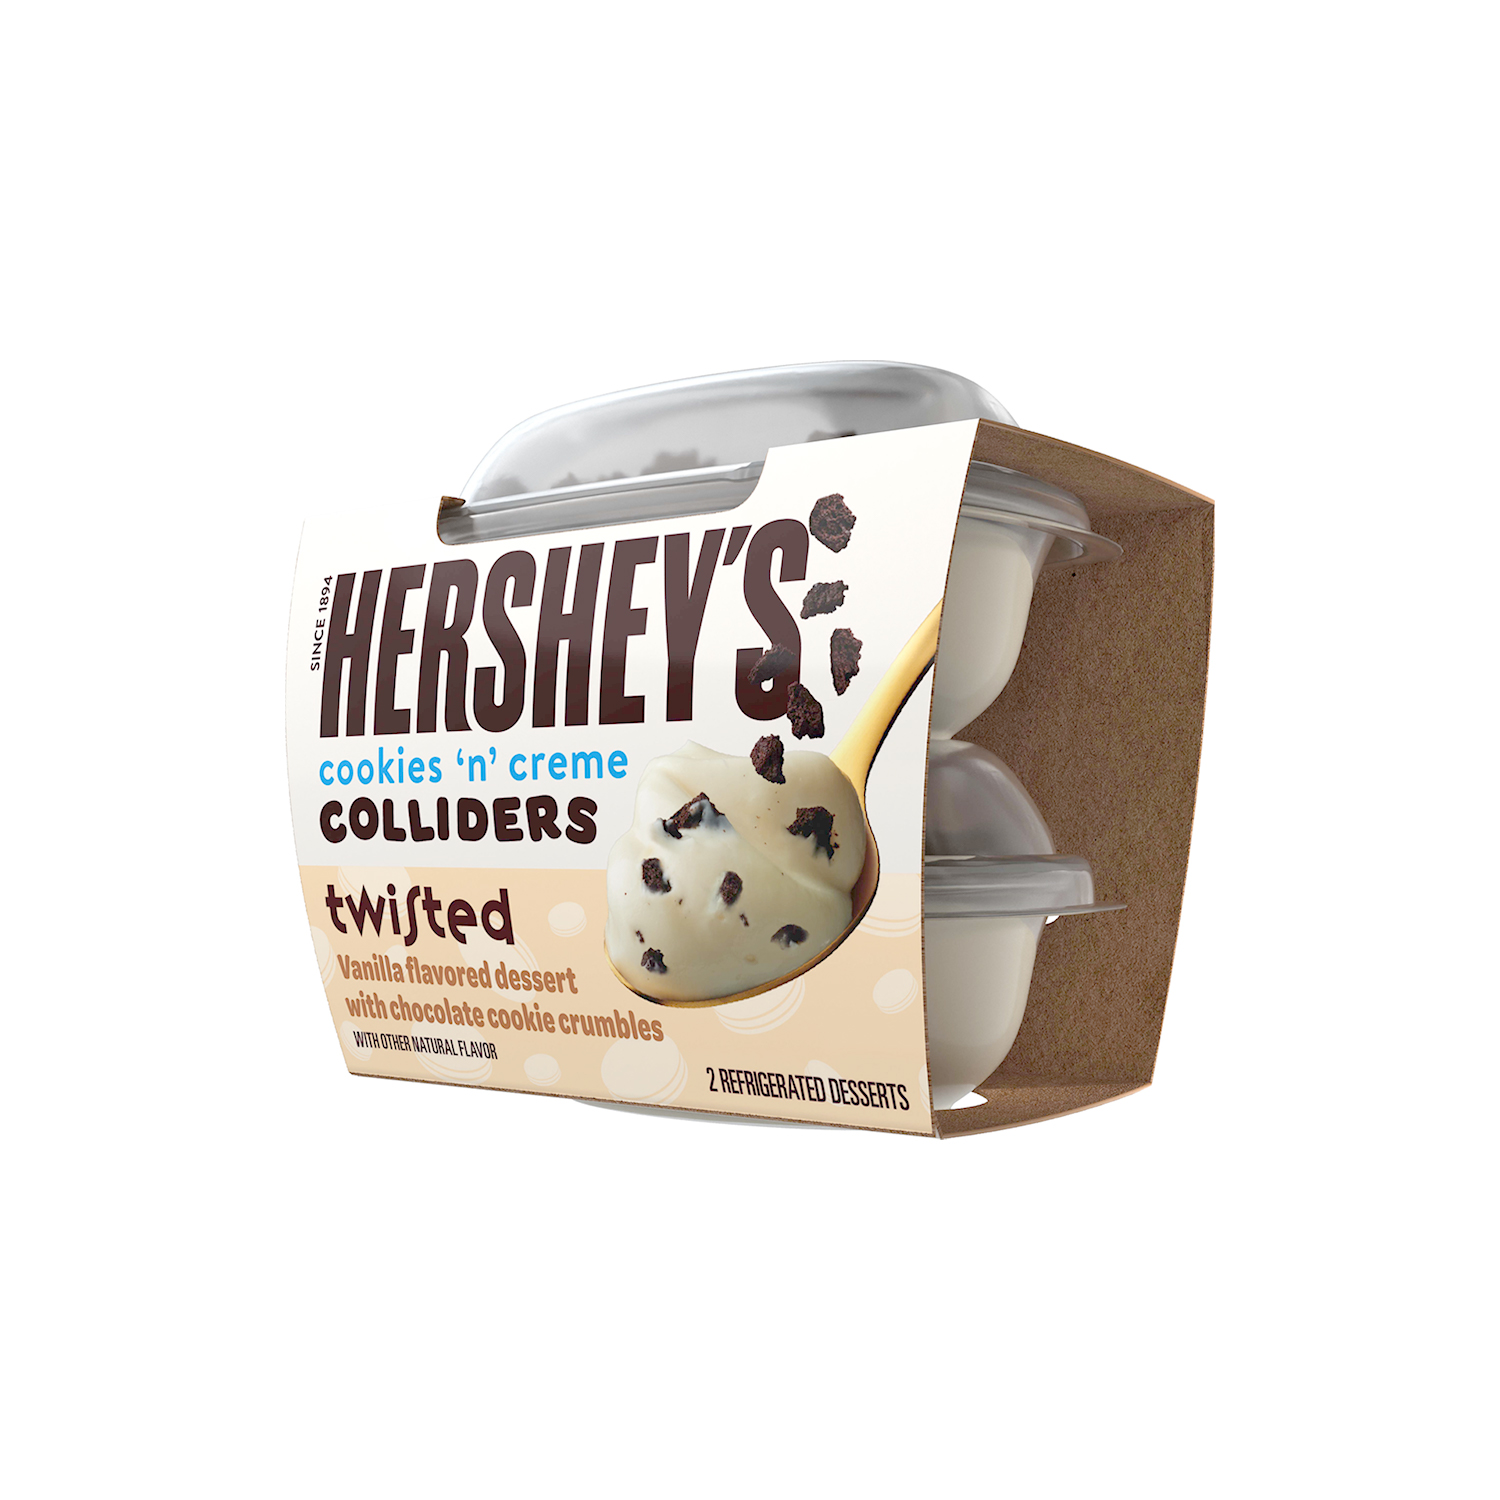 HERSHEY'S COLLIDERS™ Twisted COOKIES 'N' CREME Dessert, 7 oz, 2 pack - Right of Package